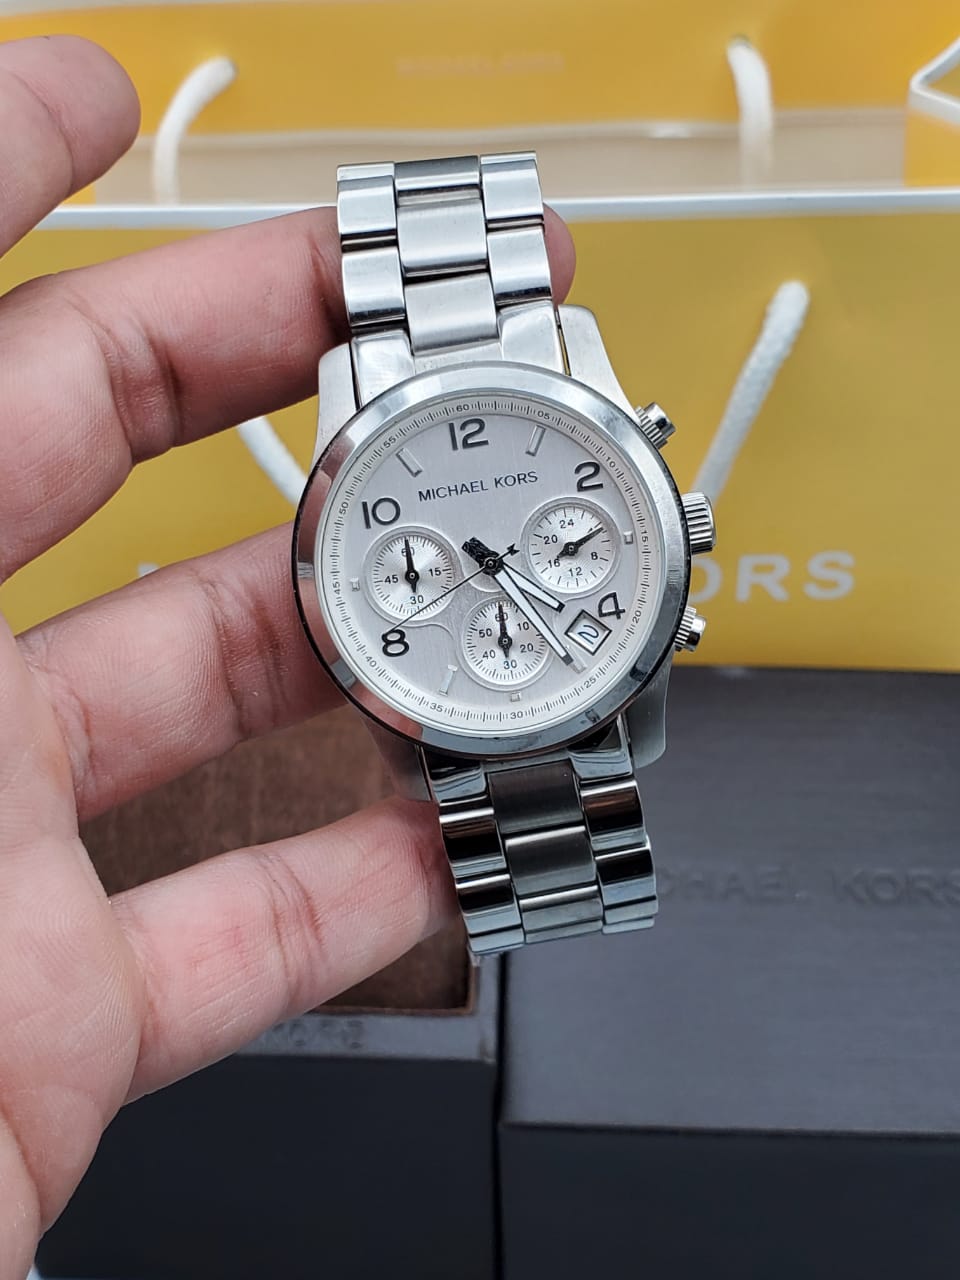 Michael Kors Watch MK6131 Silver amp Gold Tone Metal Band Round 38 mm  Silver Dial  eBay